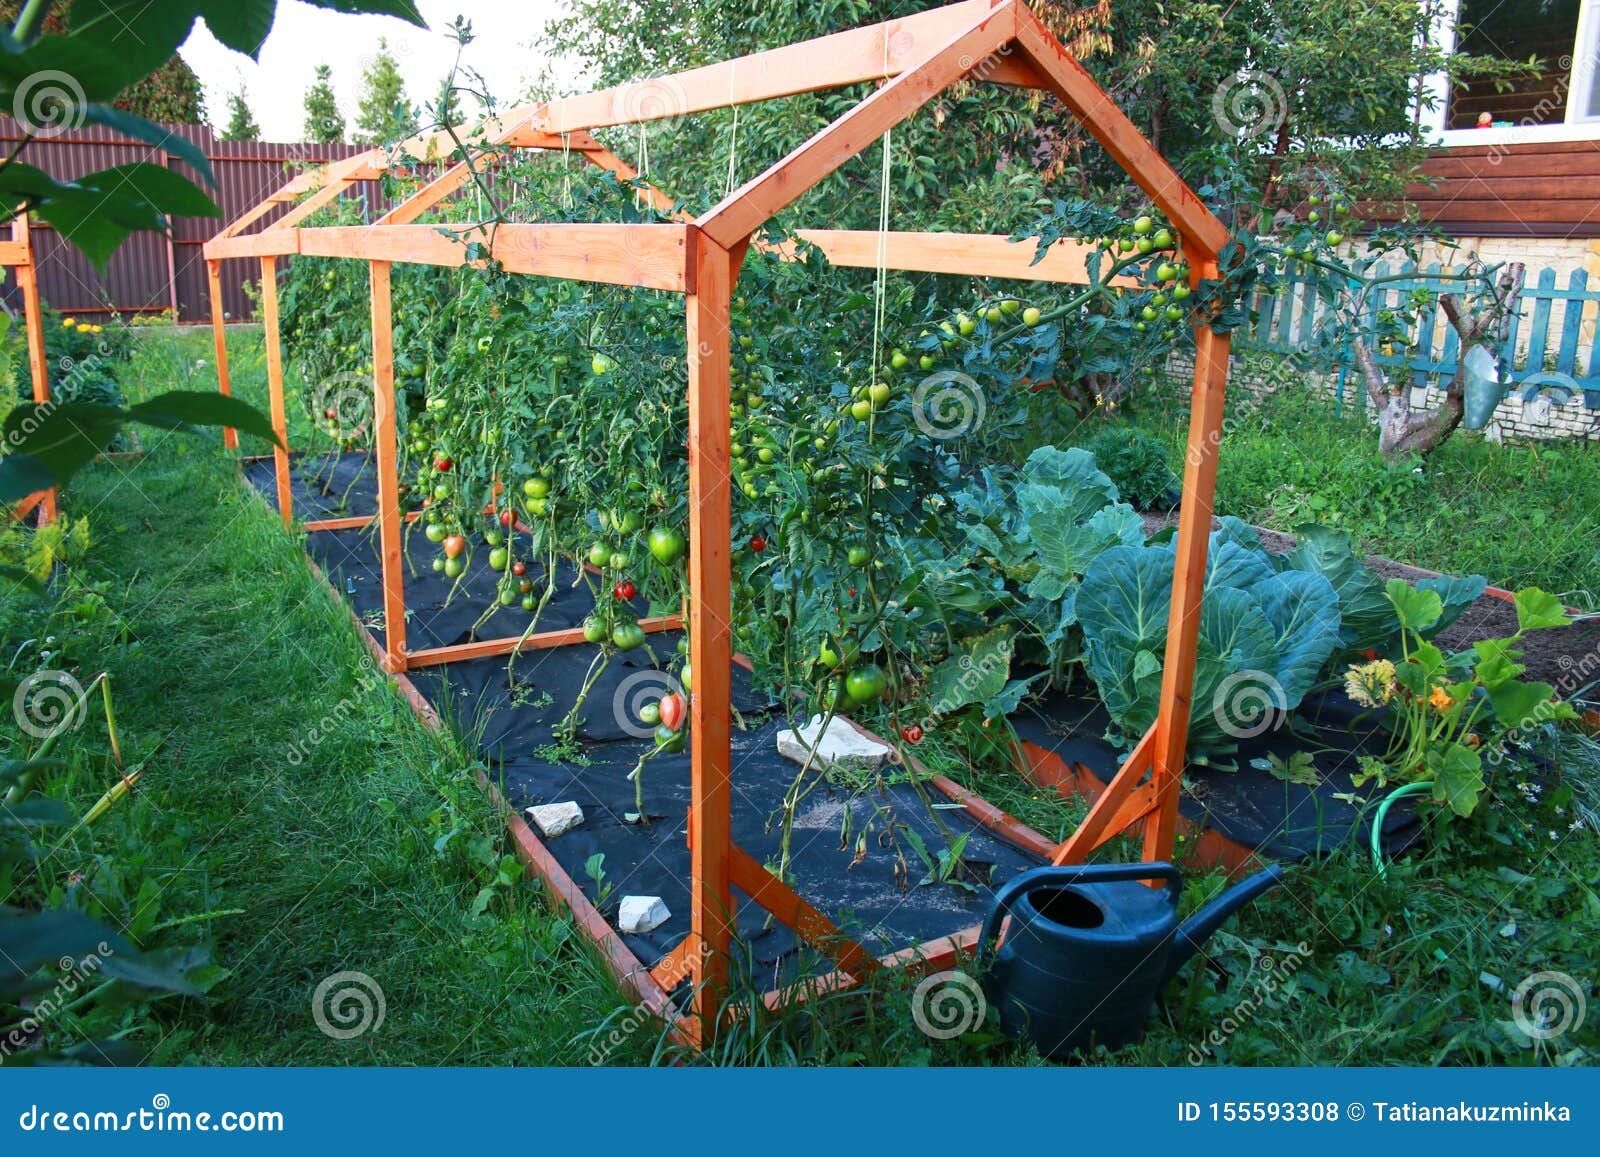 Tomato Plantation Grow In Garden On Farm Black Mulch Homegrown Tomatoes Grown In The Garden Harvest Stock Photo Image Of Closeup Healthy 155593308